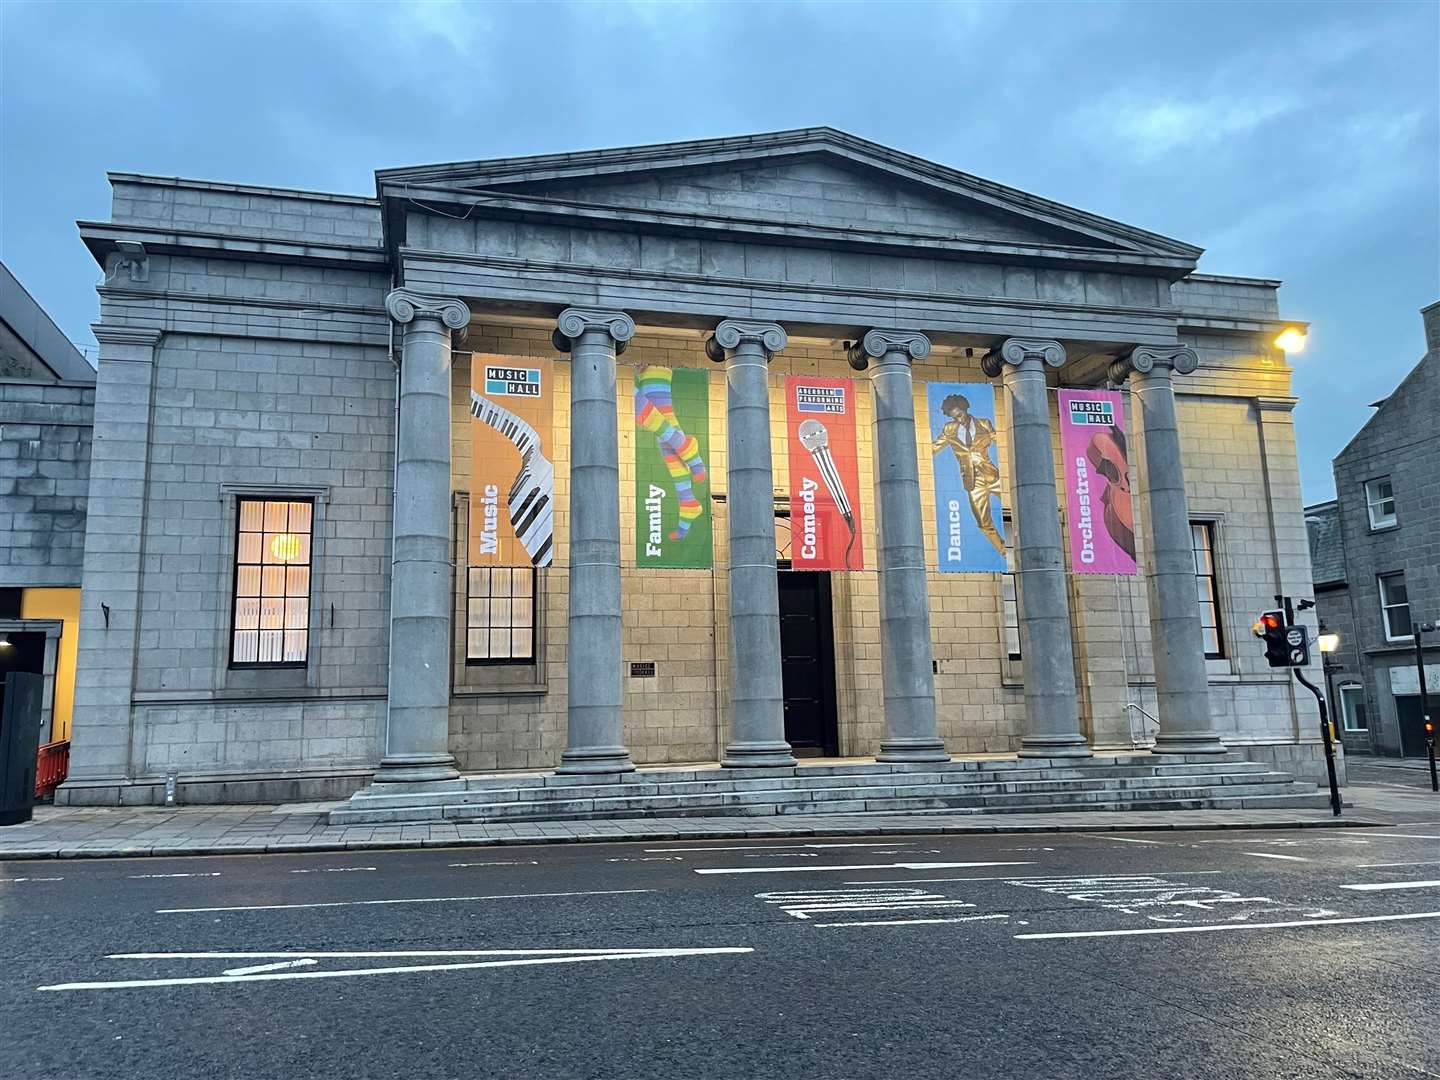 New colourful banners have been unveiled outside the Music Hall in Aberdeen.